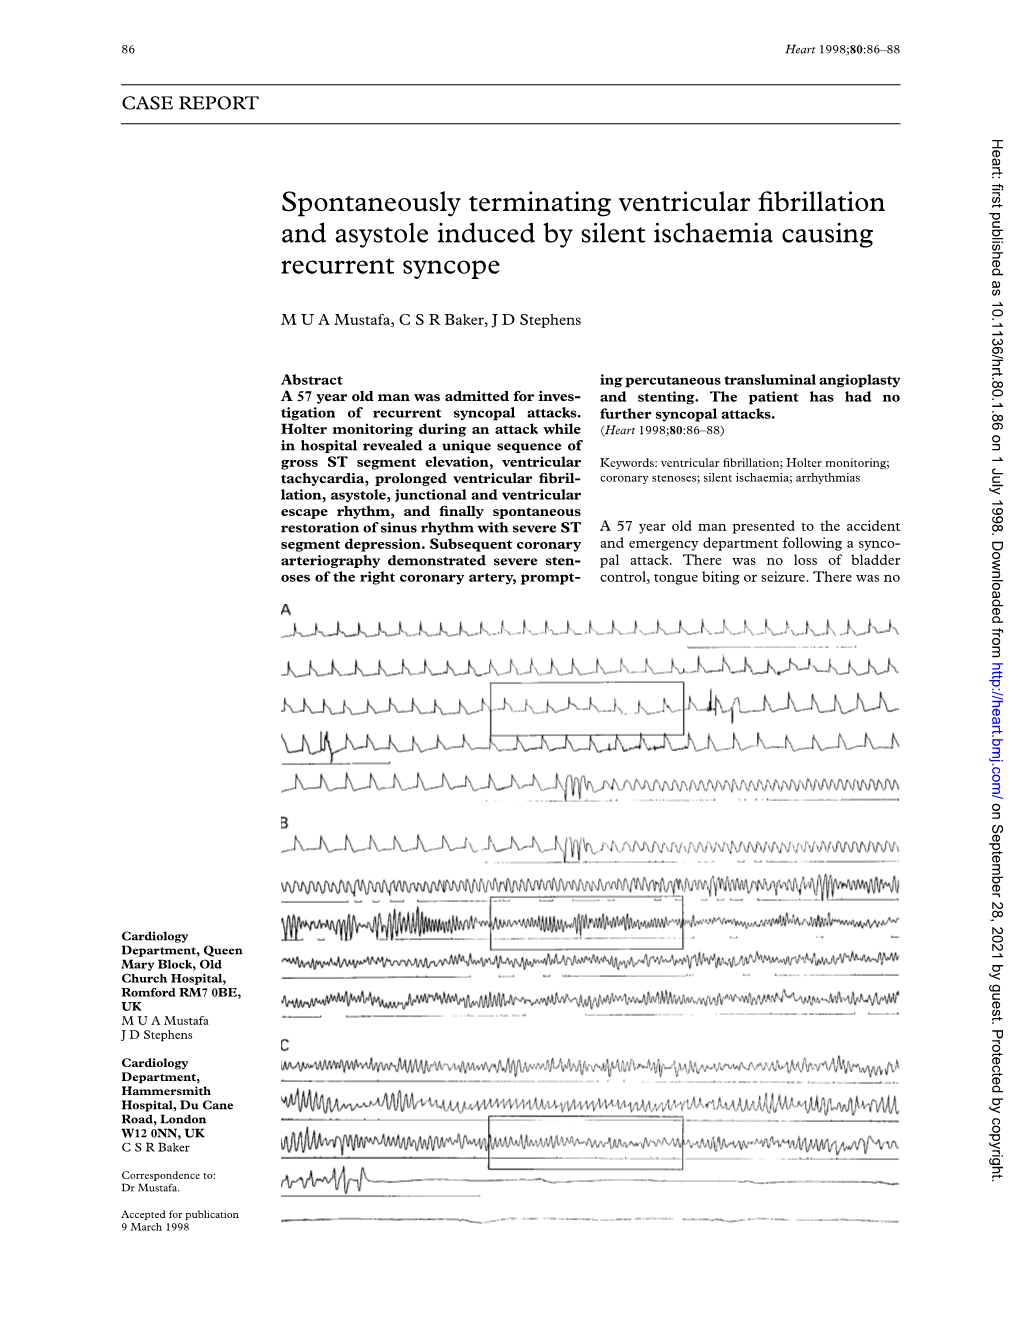 Spontaneously Terminating Ventricular Fibrillation and Asystole Induced By